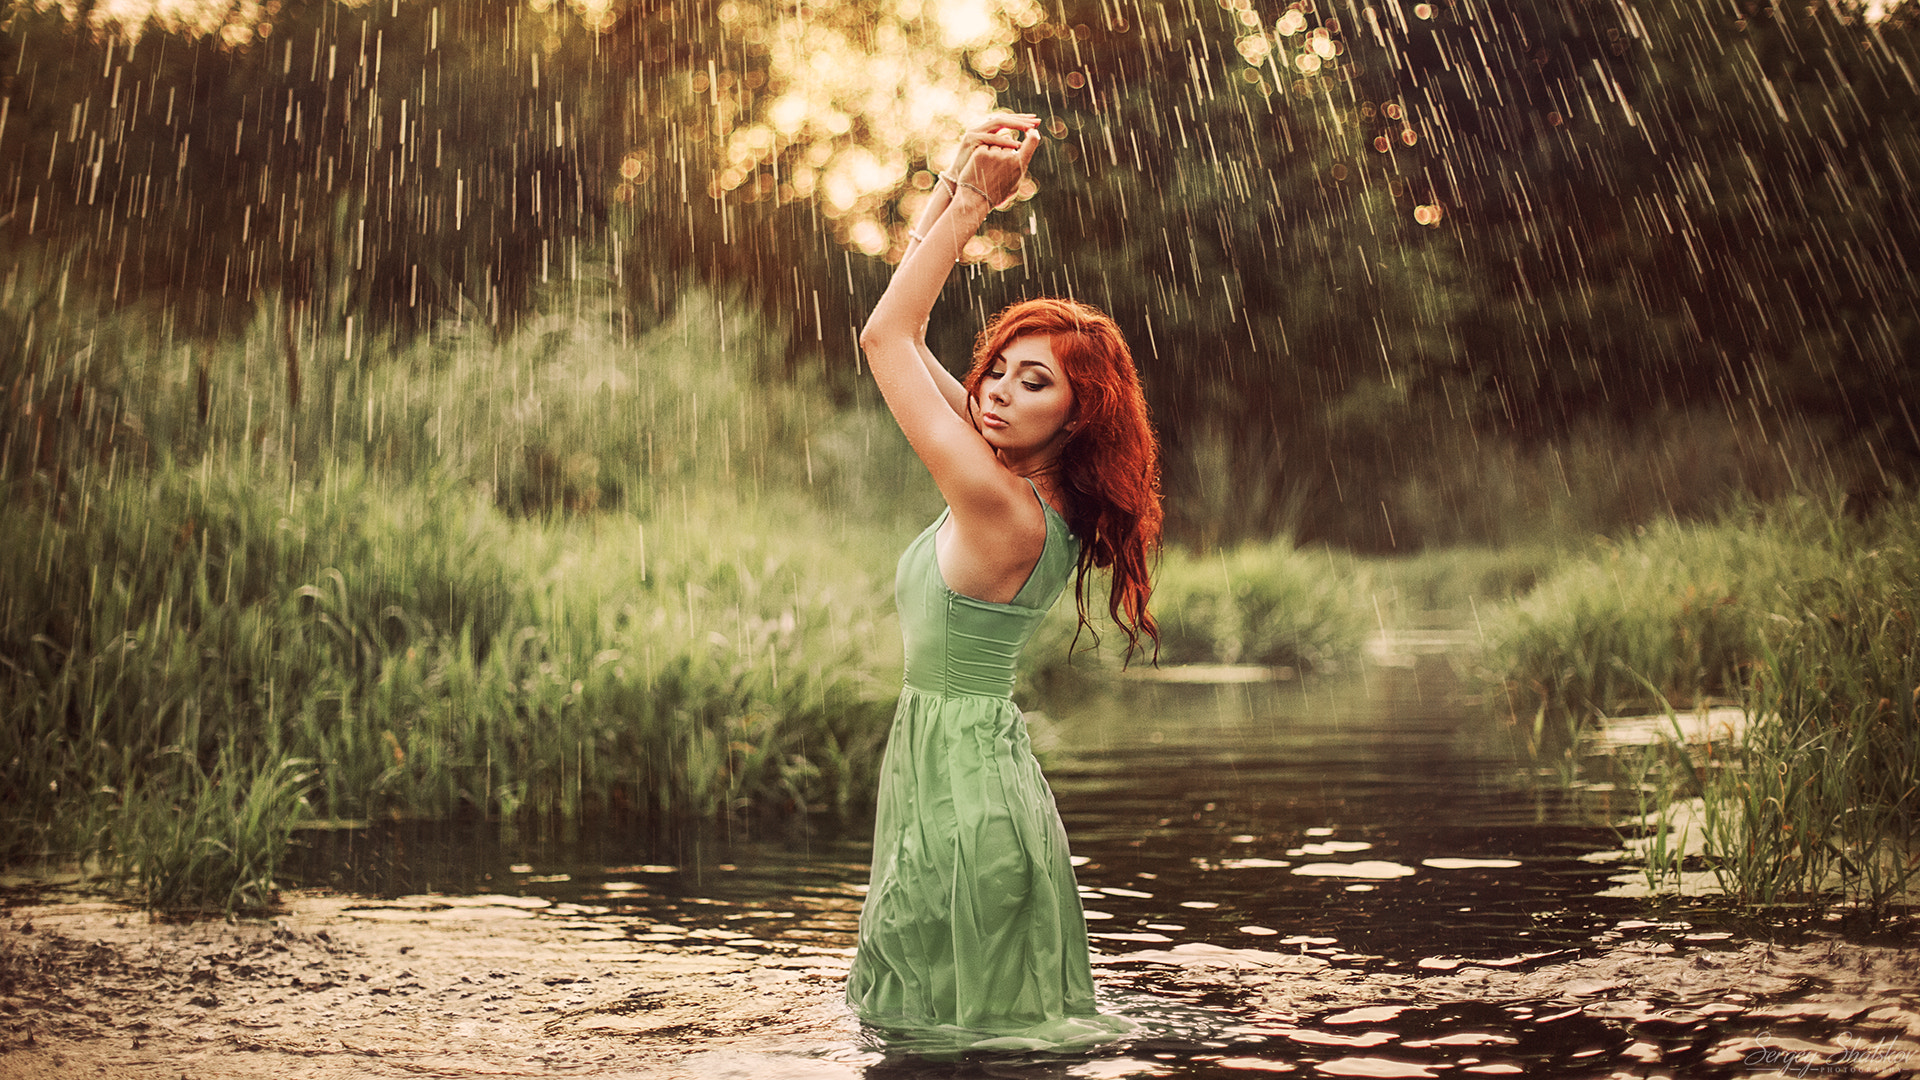 People 1920x1080 Sergey Shatskov arms up redhead nature women 500px women outdoors